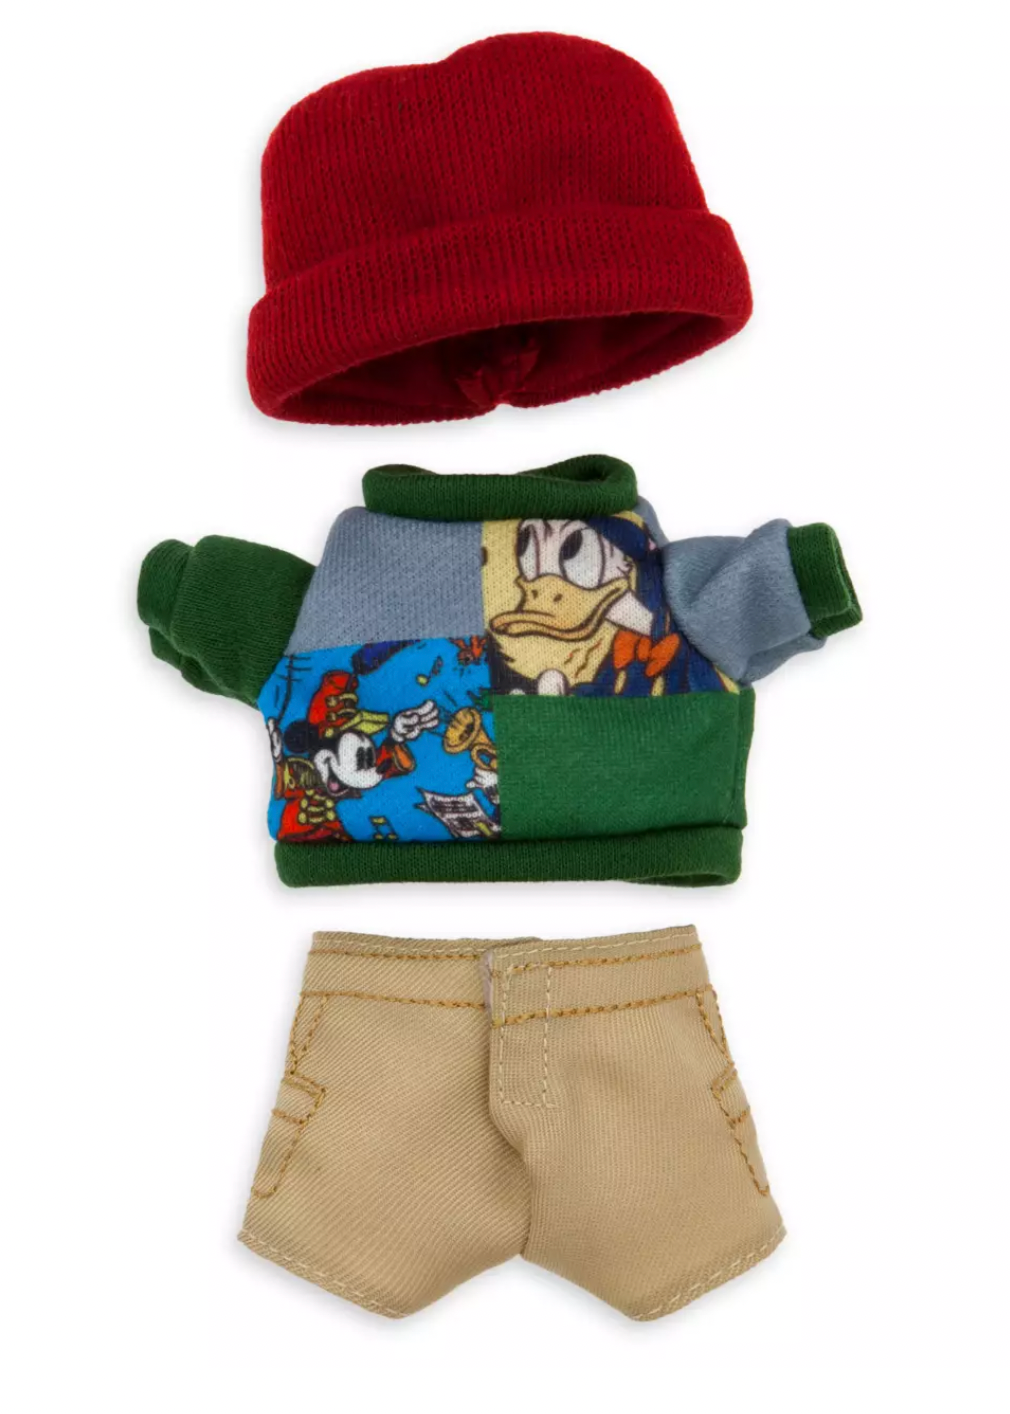 Disney NuiMOs Outfit Hoodie Character Art Beige Shorts and Red Beanie New w Card